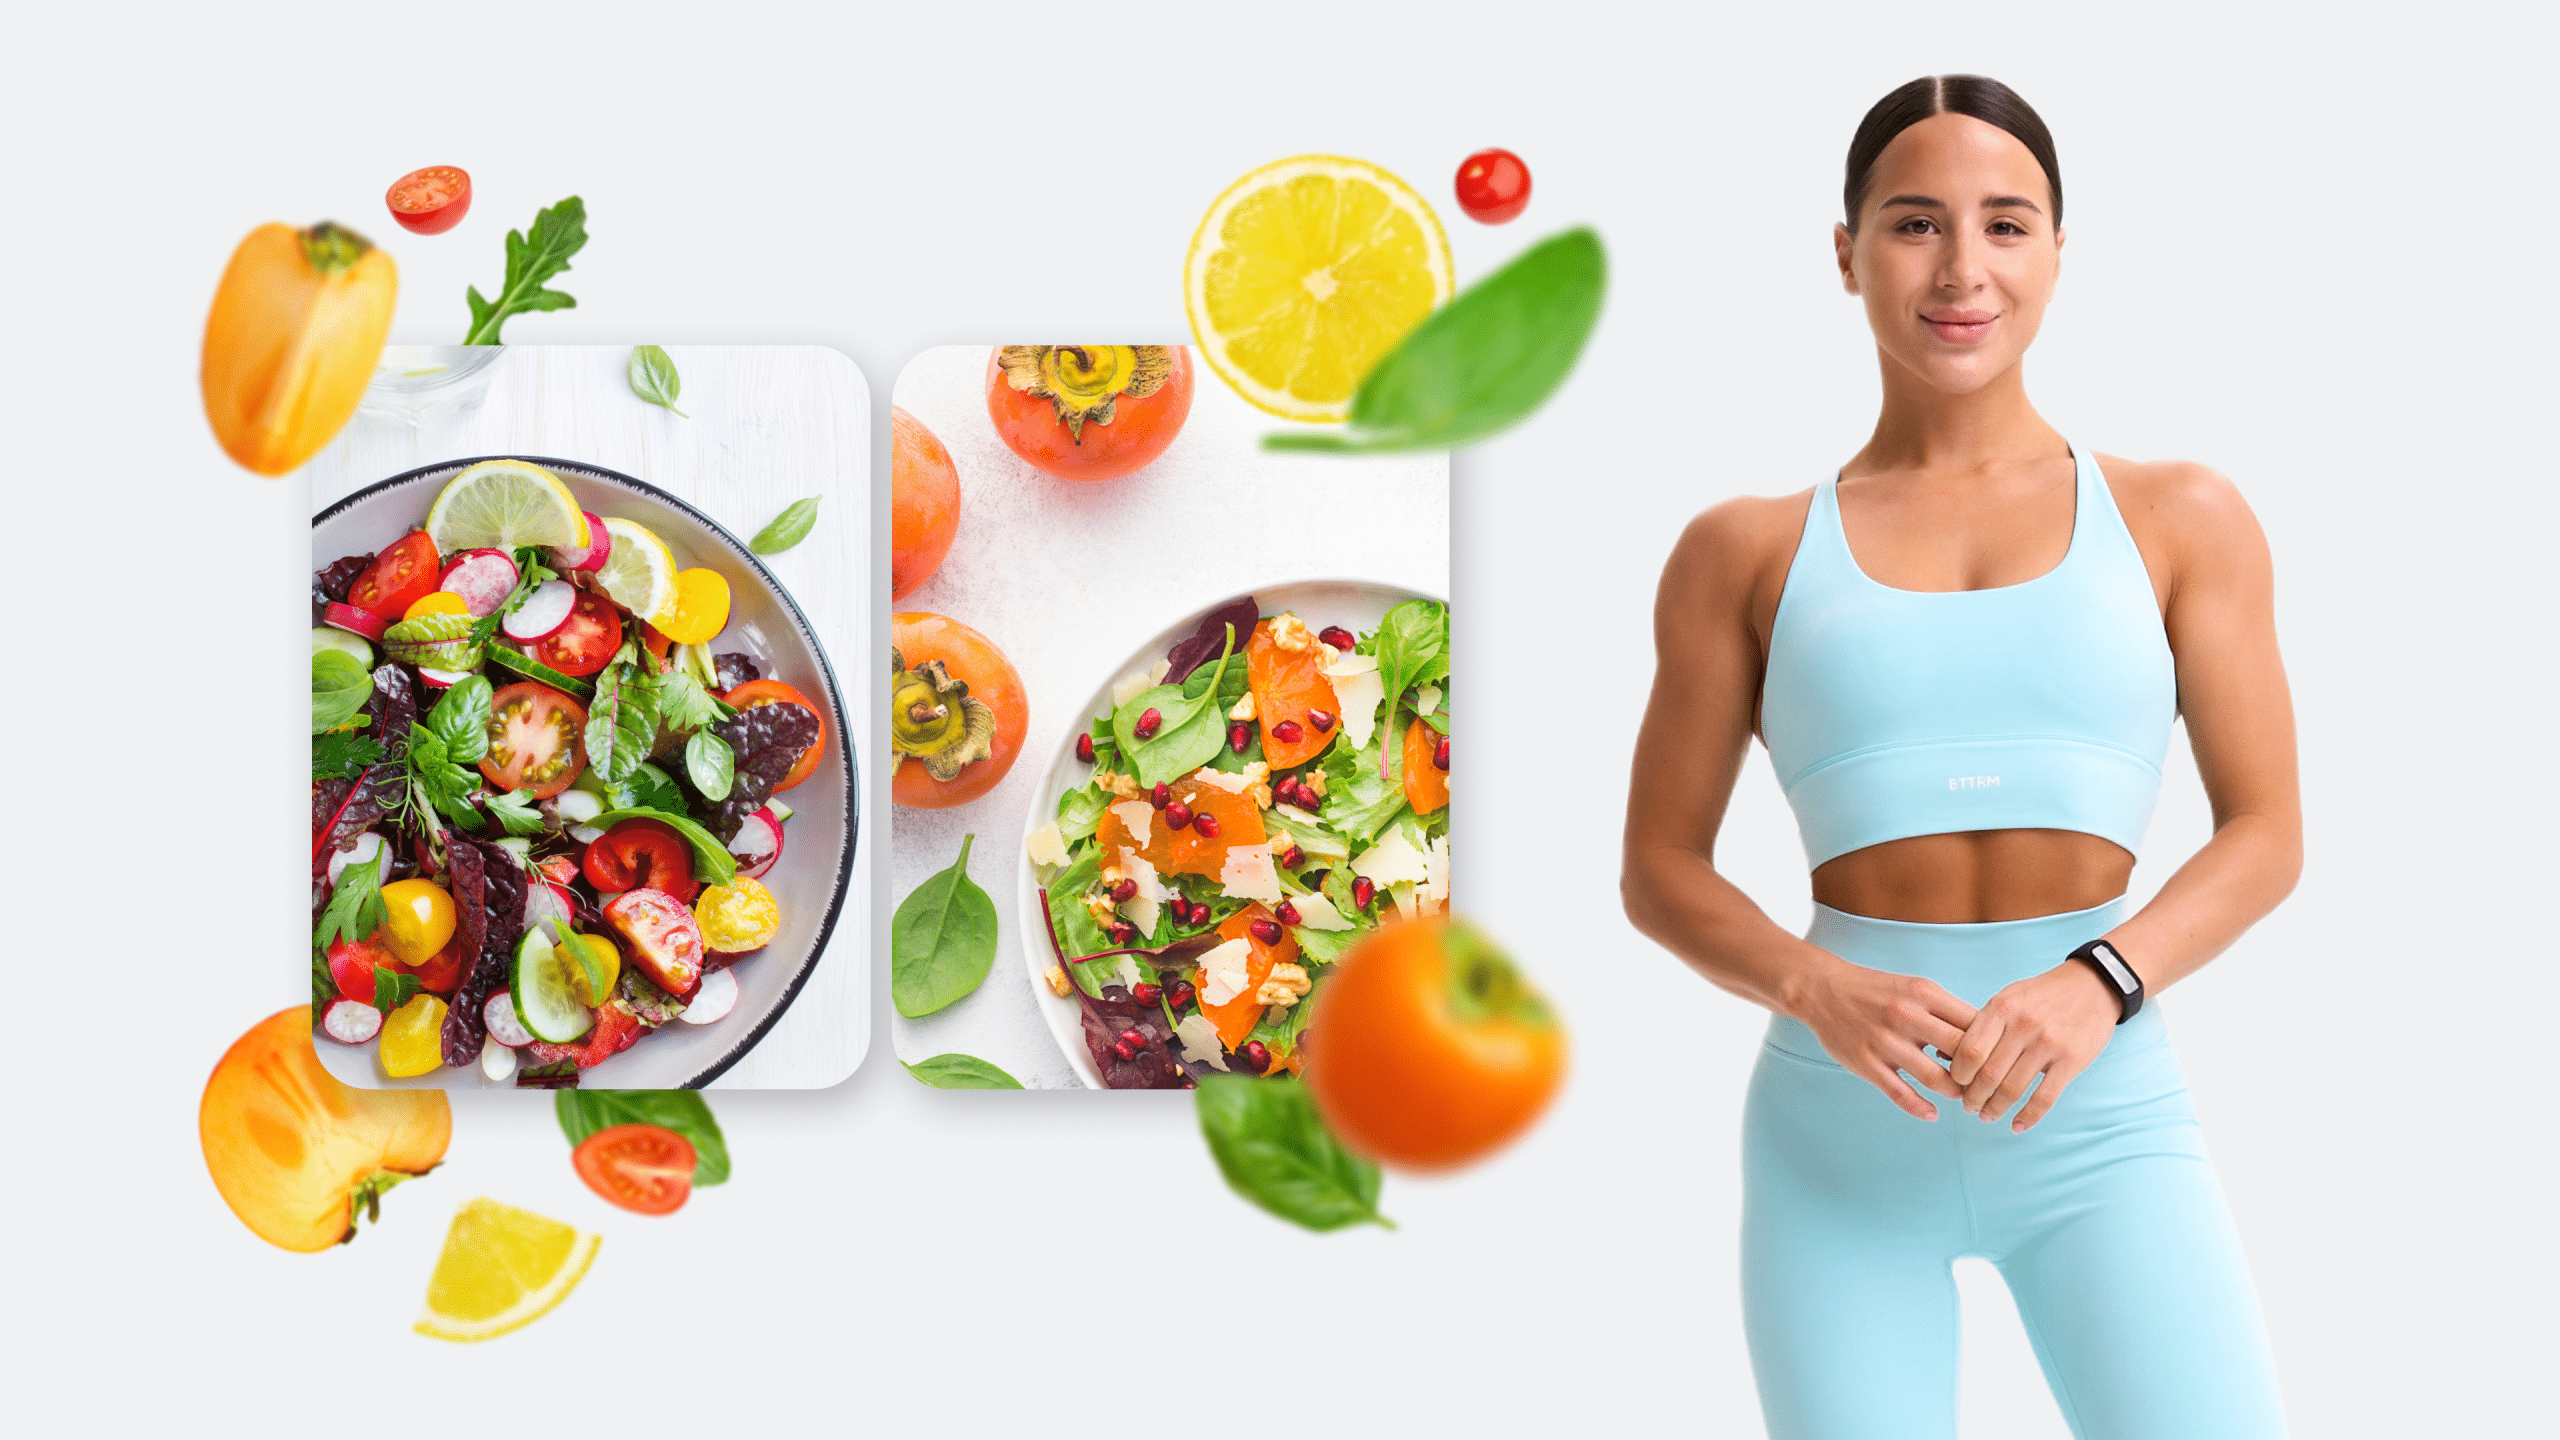 Diet Plan for Weight Loss for Women